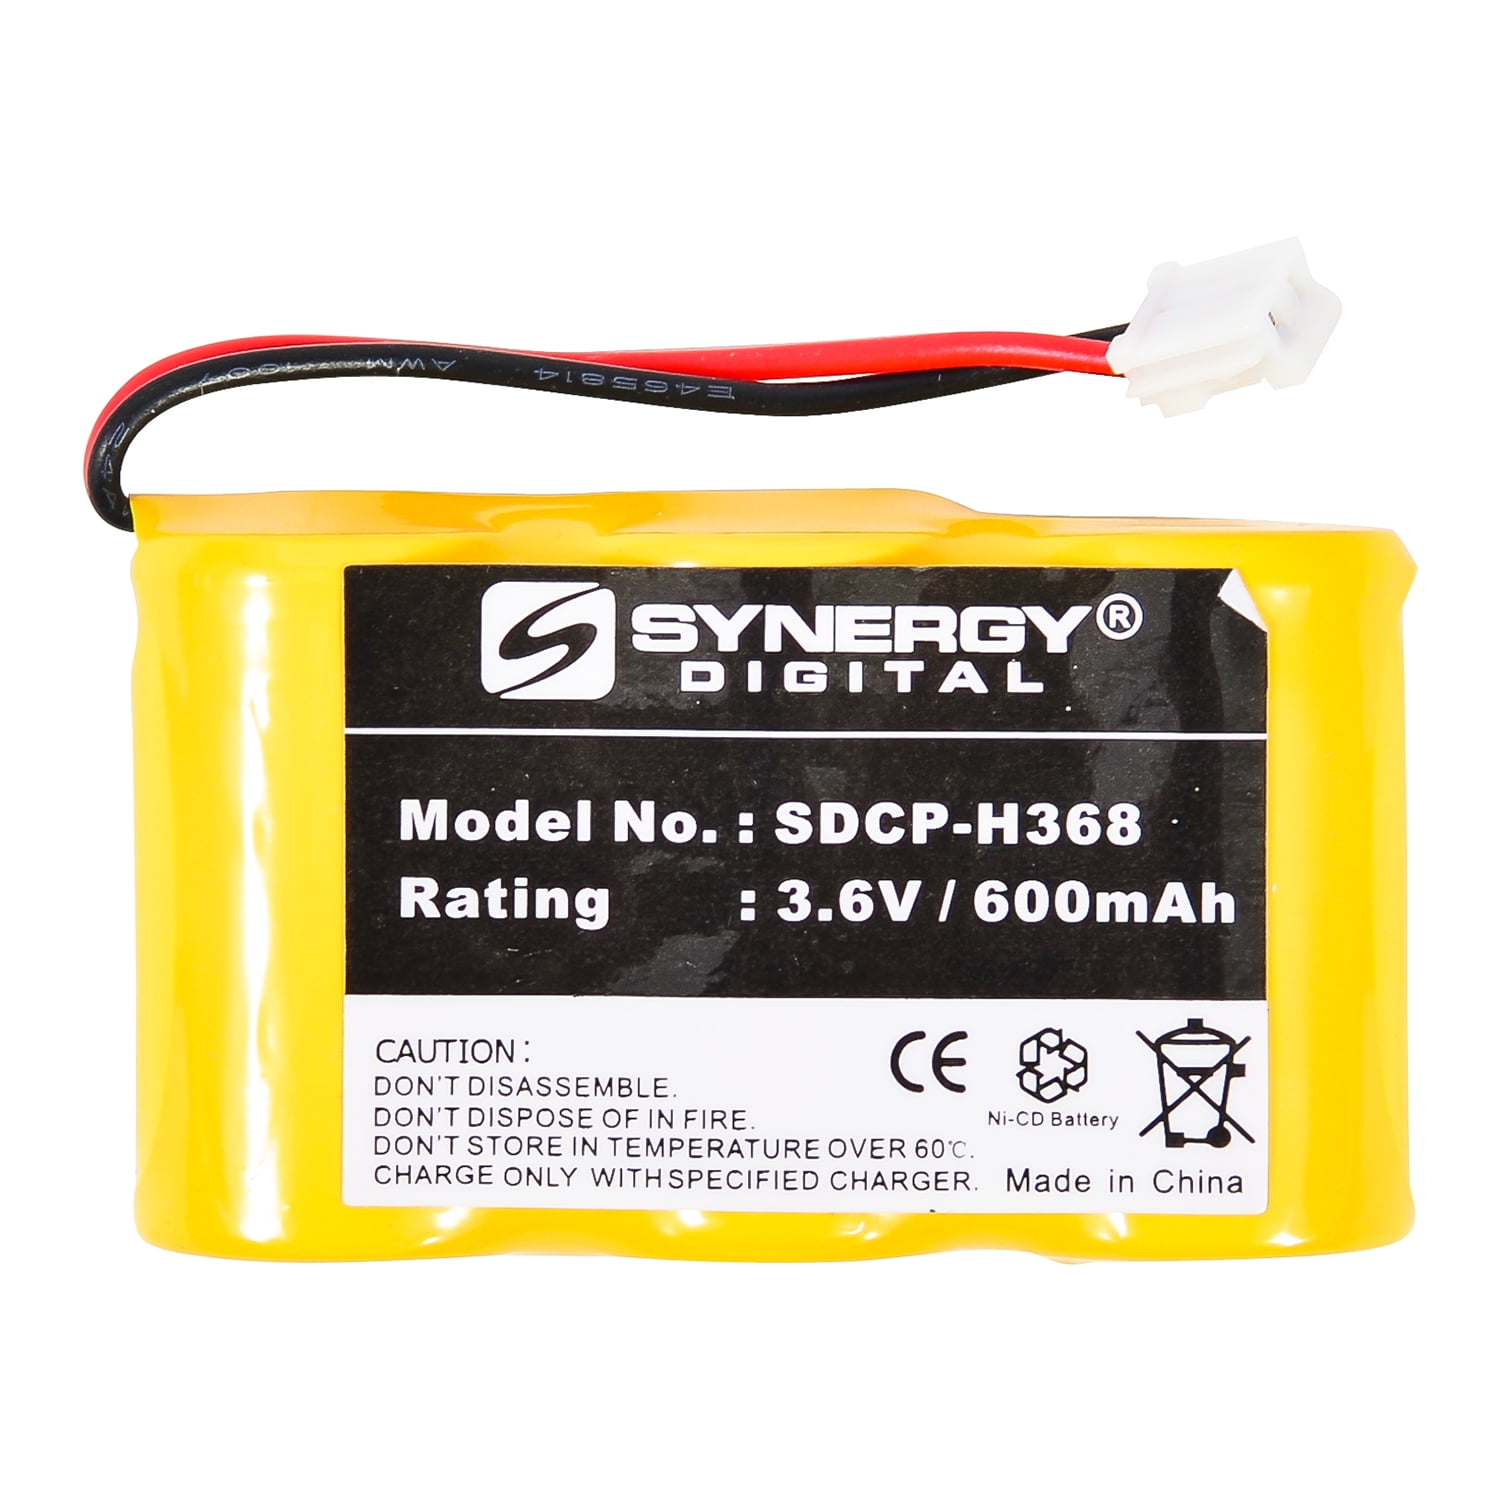 Ni-MH, 6V, 2100mAh Compatible with Sanyo VMRZ3P Digital Camera, Replacement for AKAI Battery Synergy Digital Camera Battery Ultra High Capacity